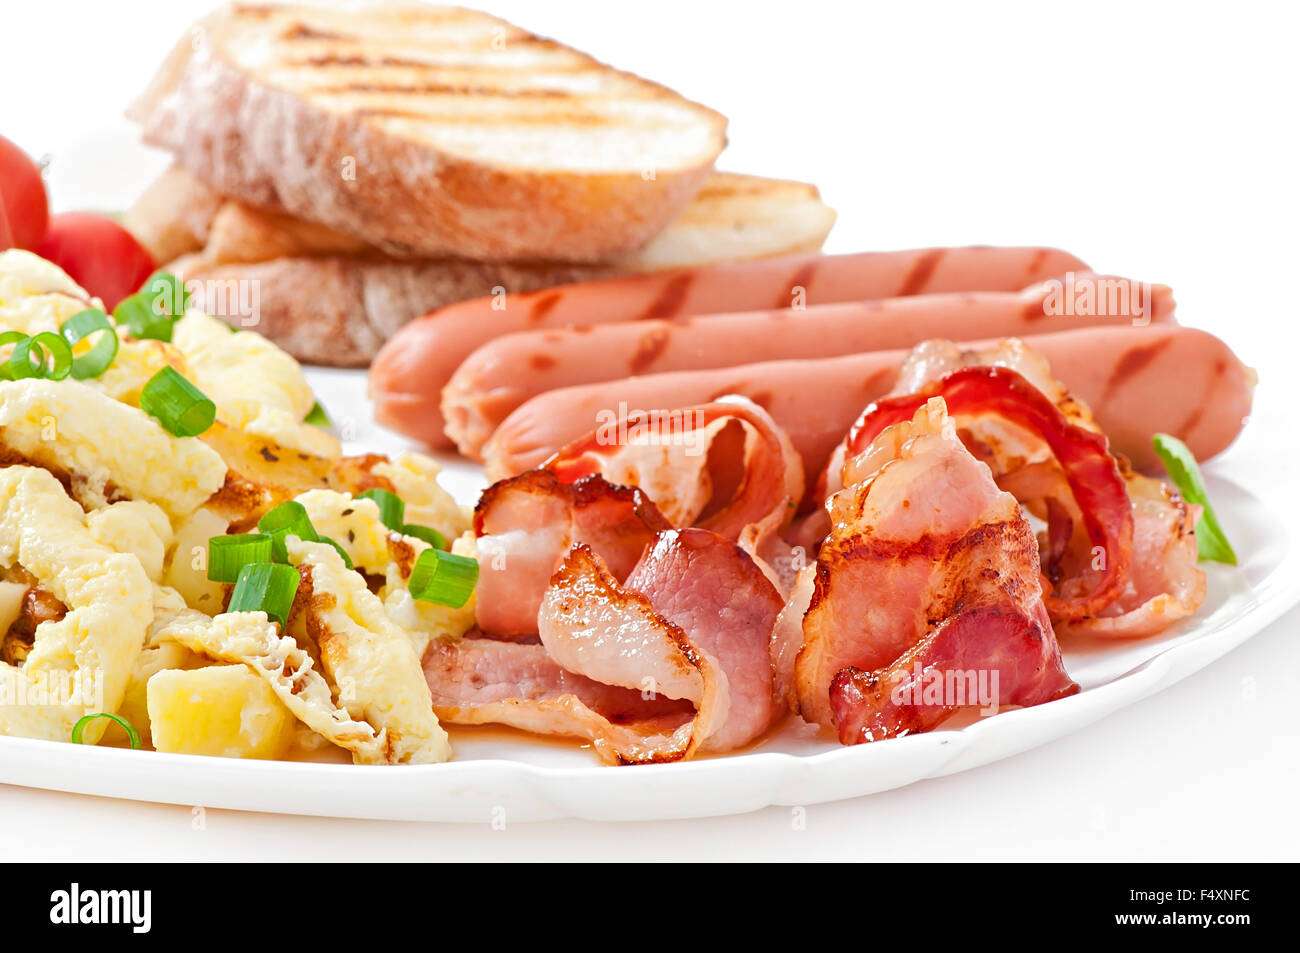 English breakfast - scrambled eggs, bacon, sausage and toast Stock Photo